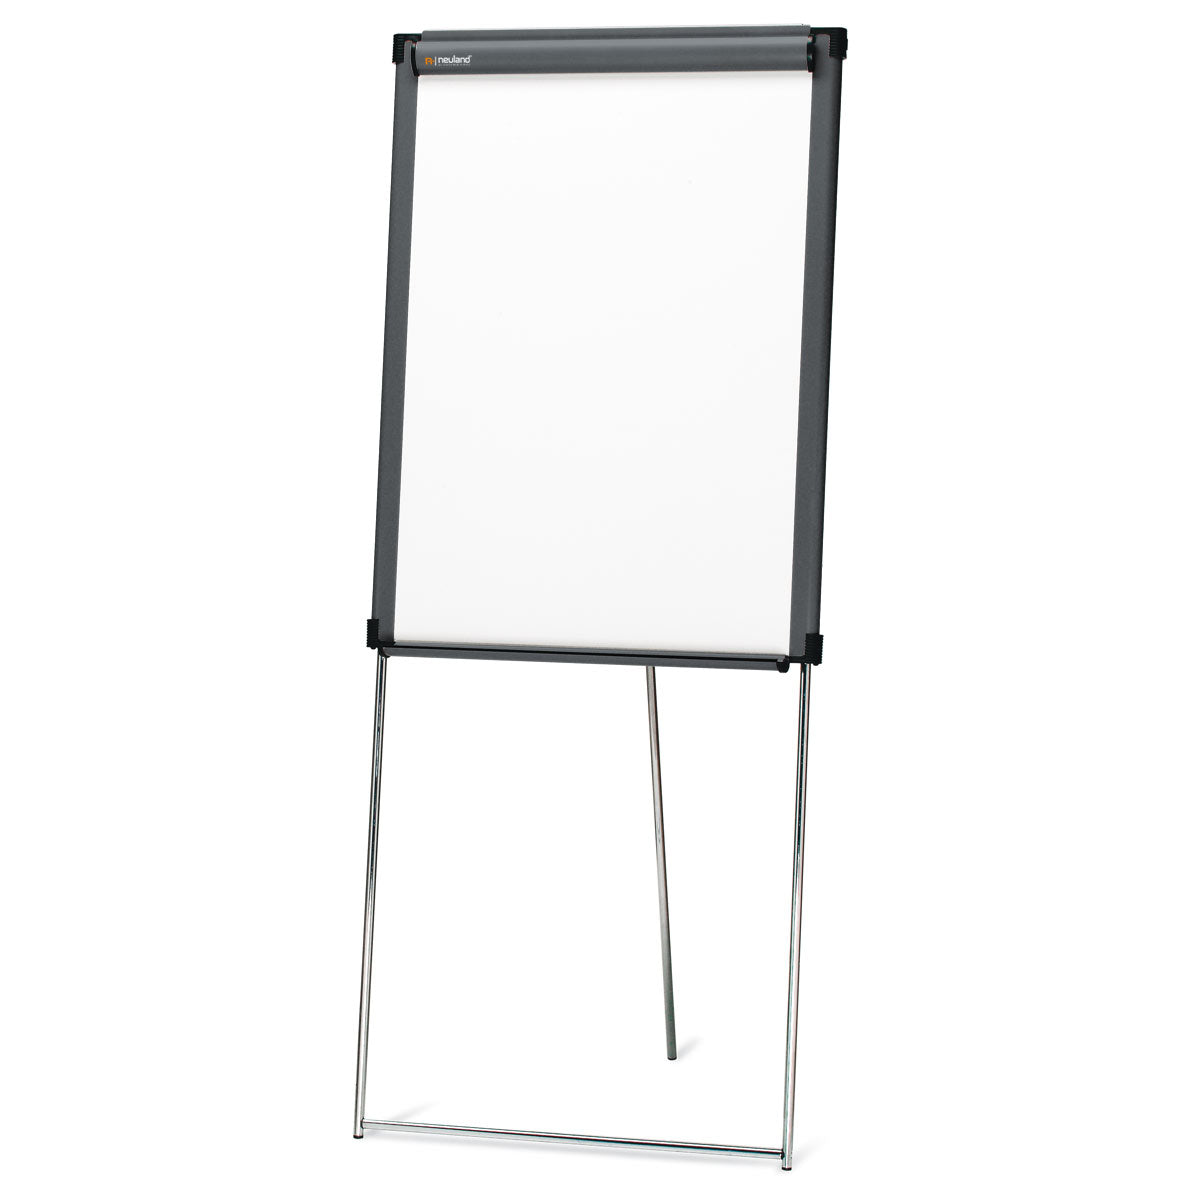 FlipChart Professional 3000 – anthracite 2 – Reduced